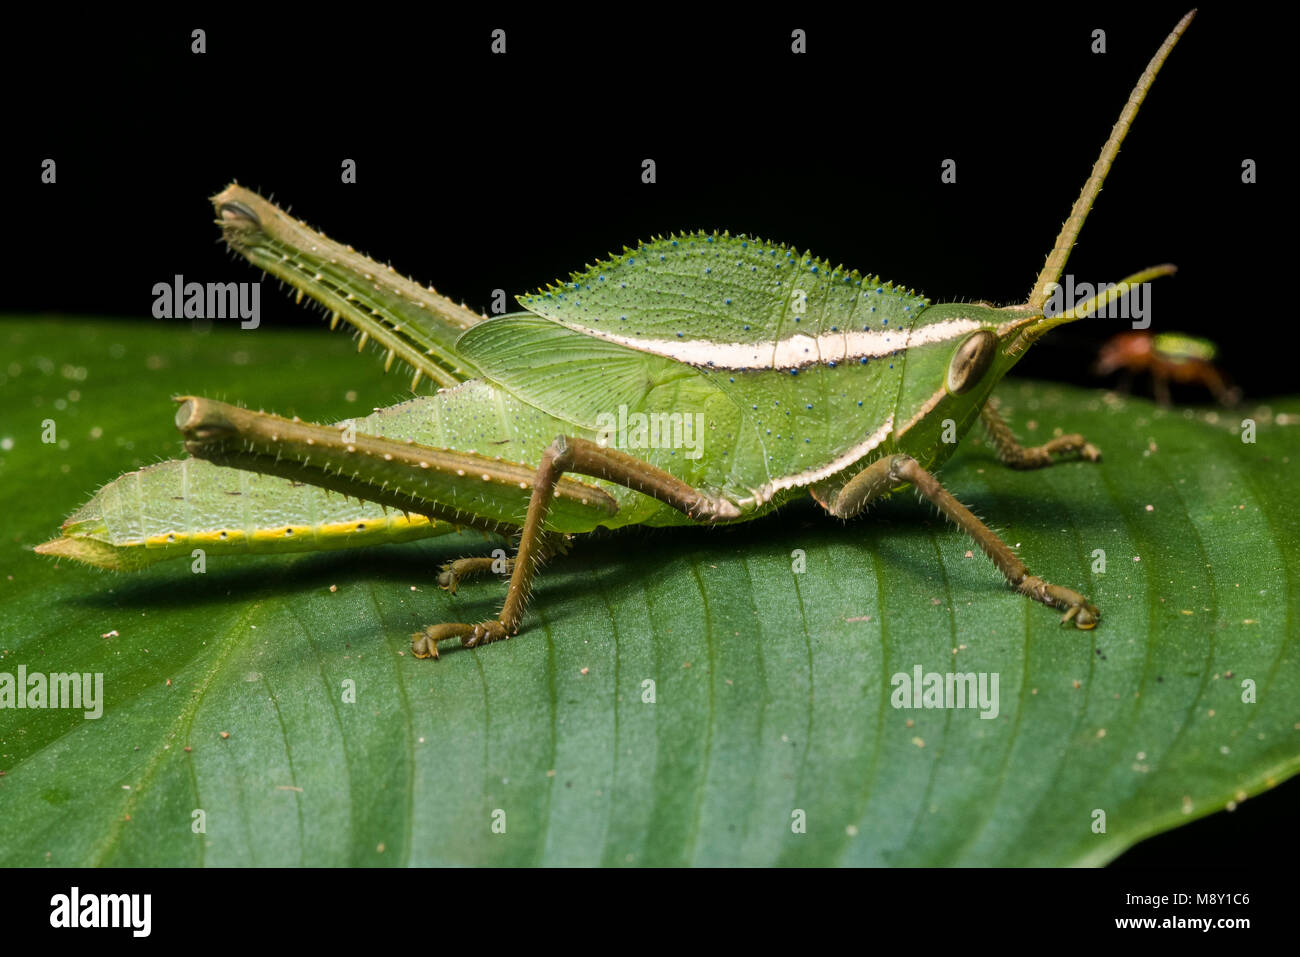 A green grasshopper from the jungle. Stock Photo